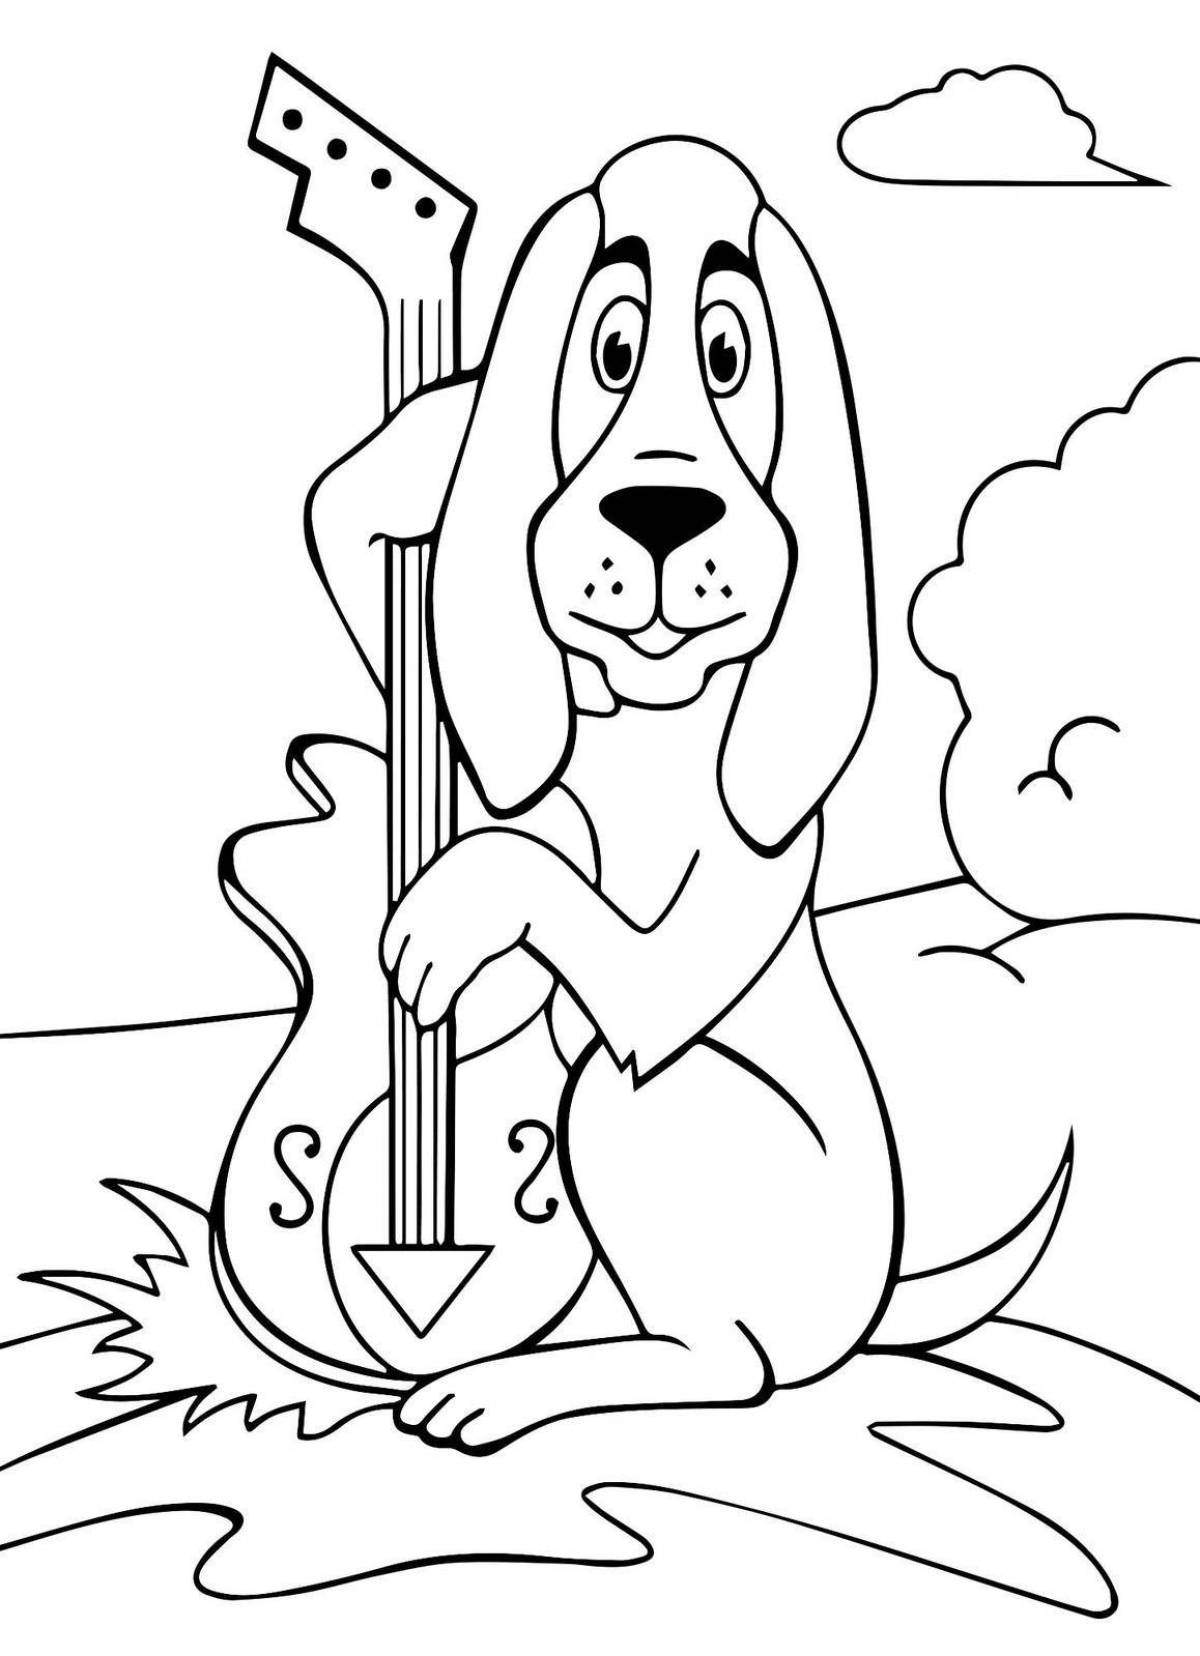 Coloring page merry Bremen town musicians